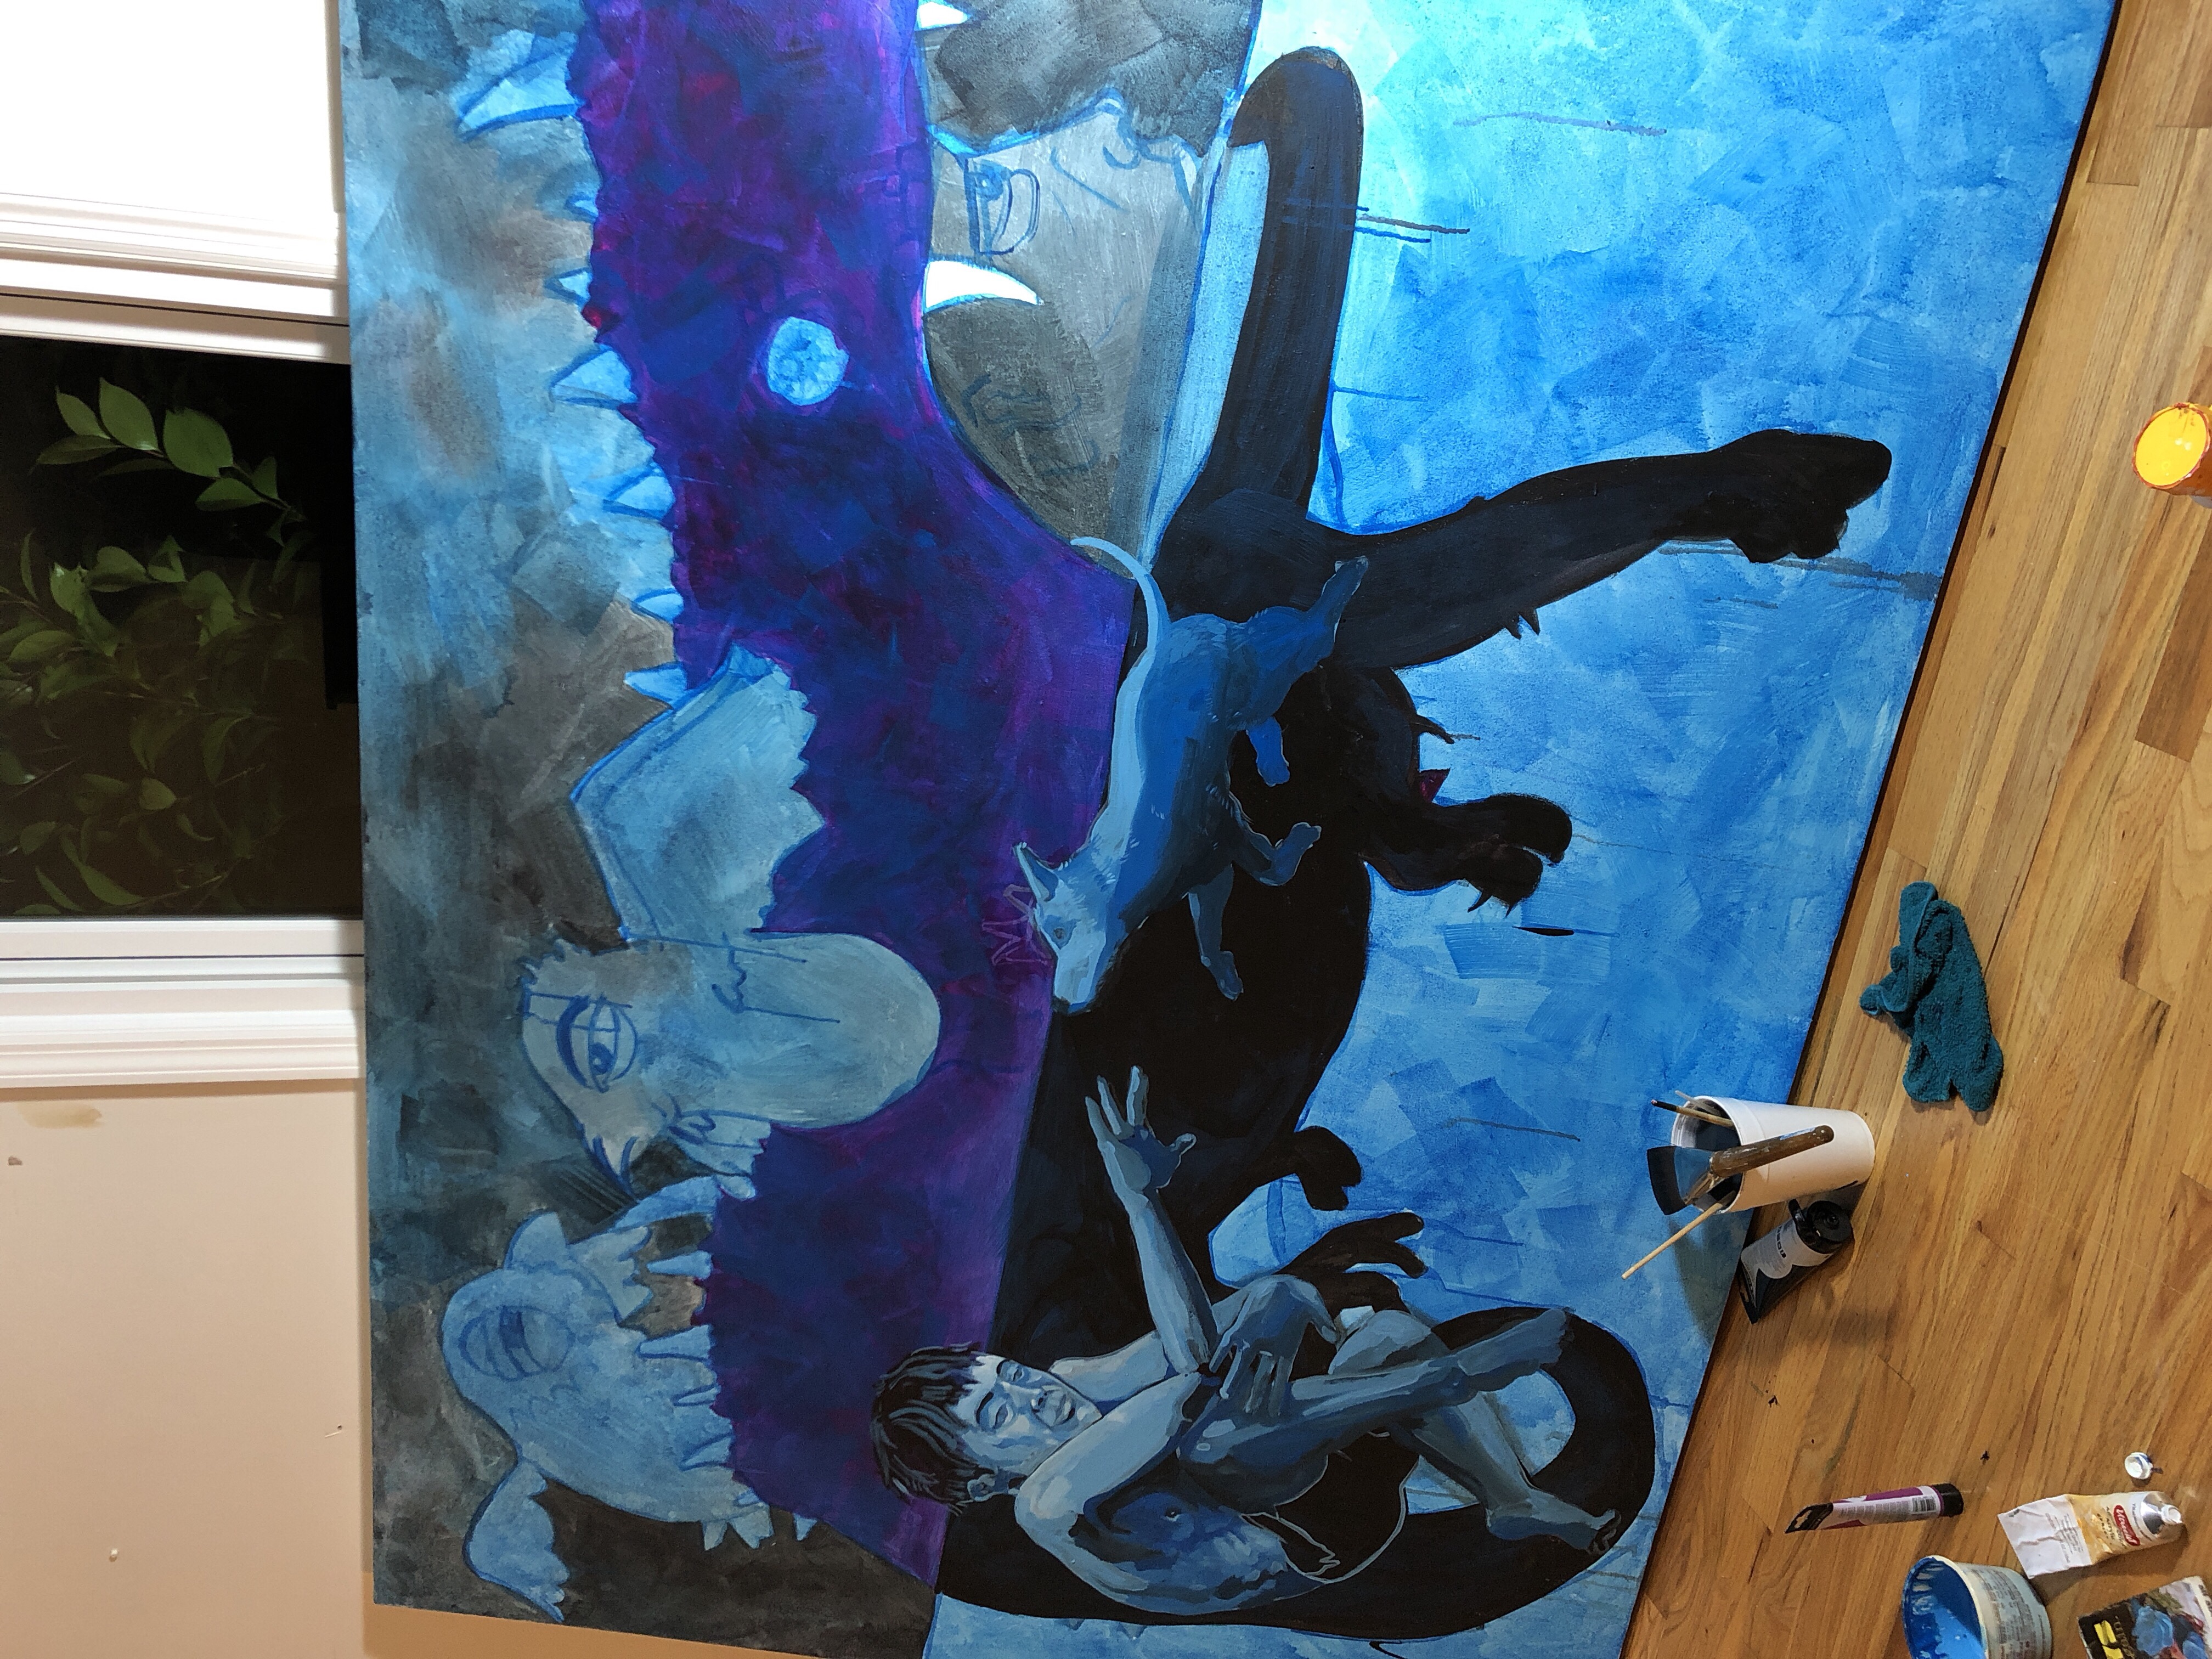 Painting in progress, Blue and purple tones with a person surrounded by dark shapes and outlines